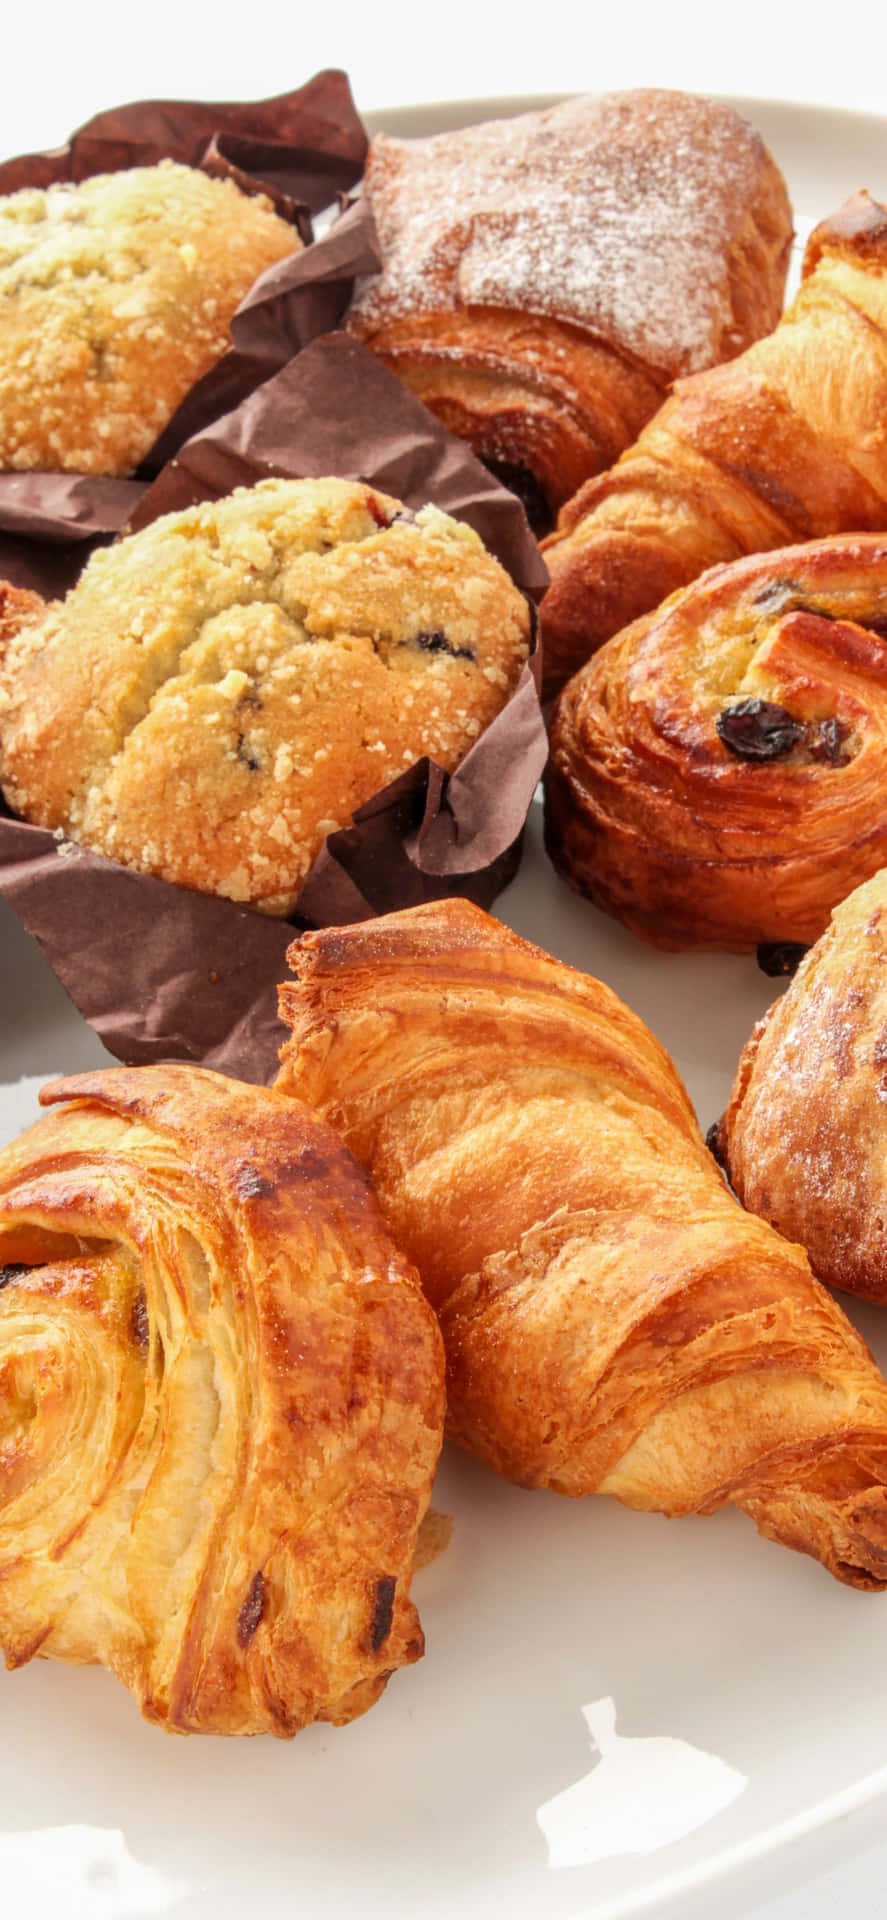 iPhone XD Pastries Background Yummy Breads